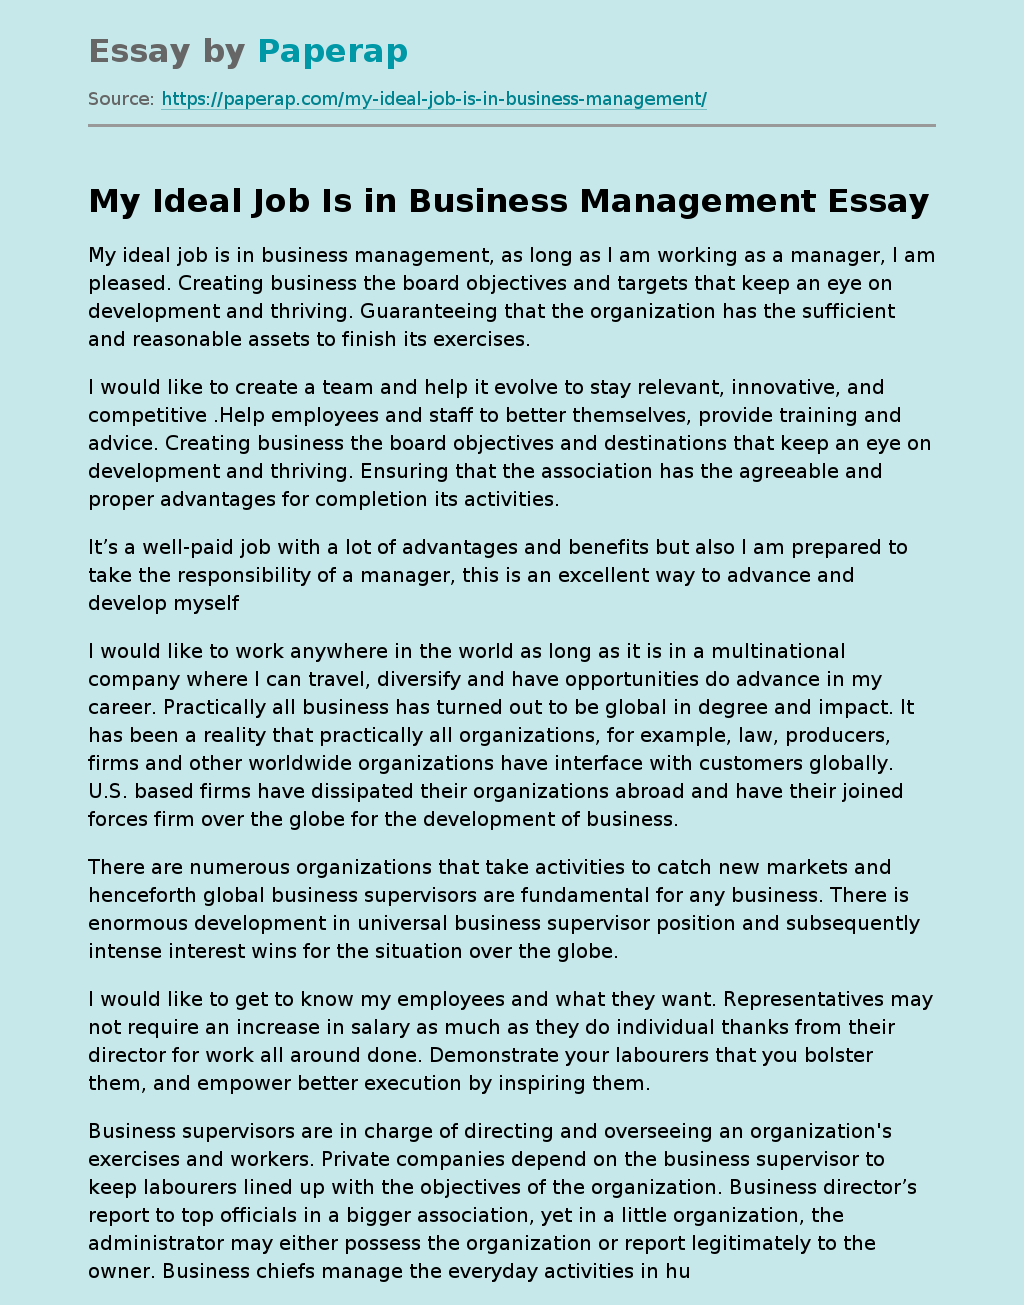 My Ideal Job Is in Business Management